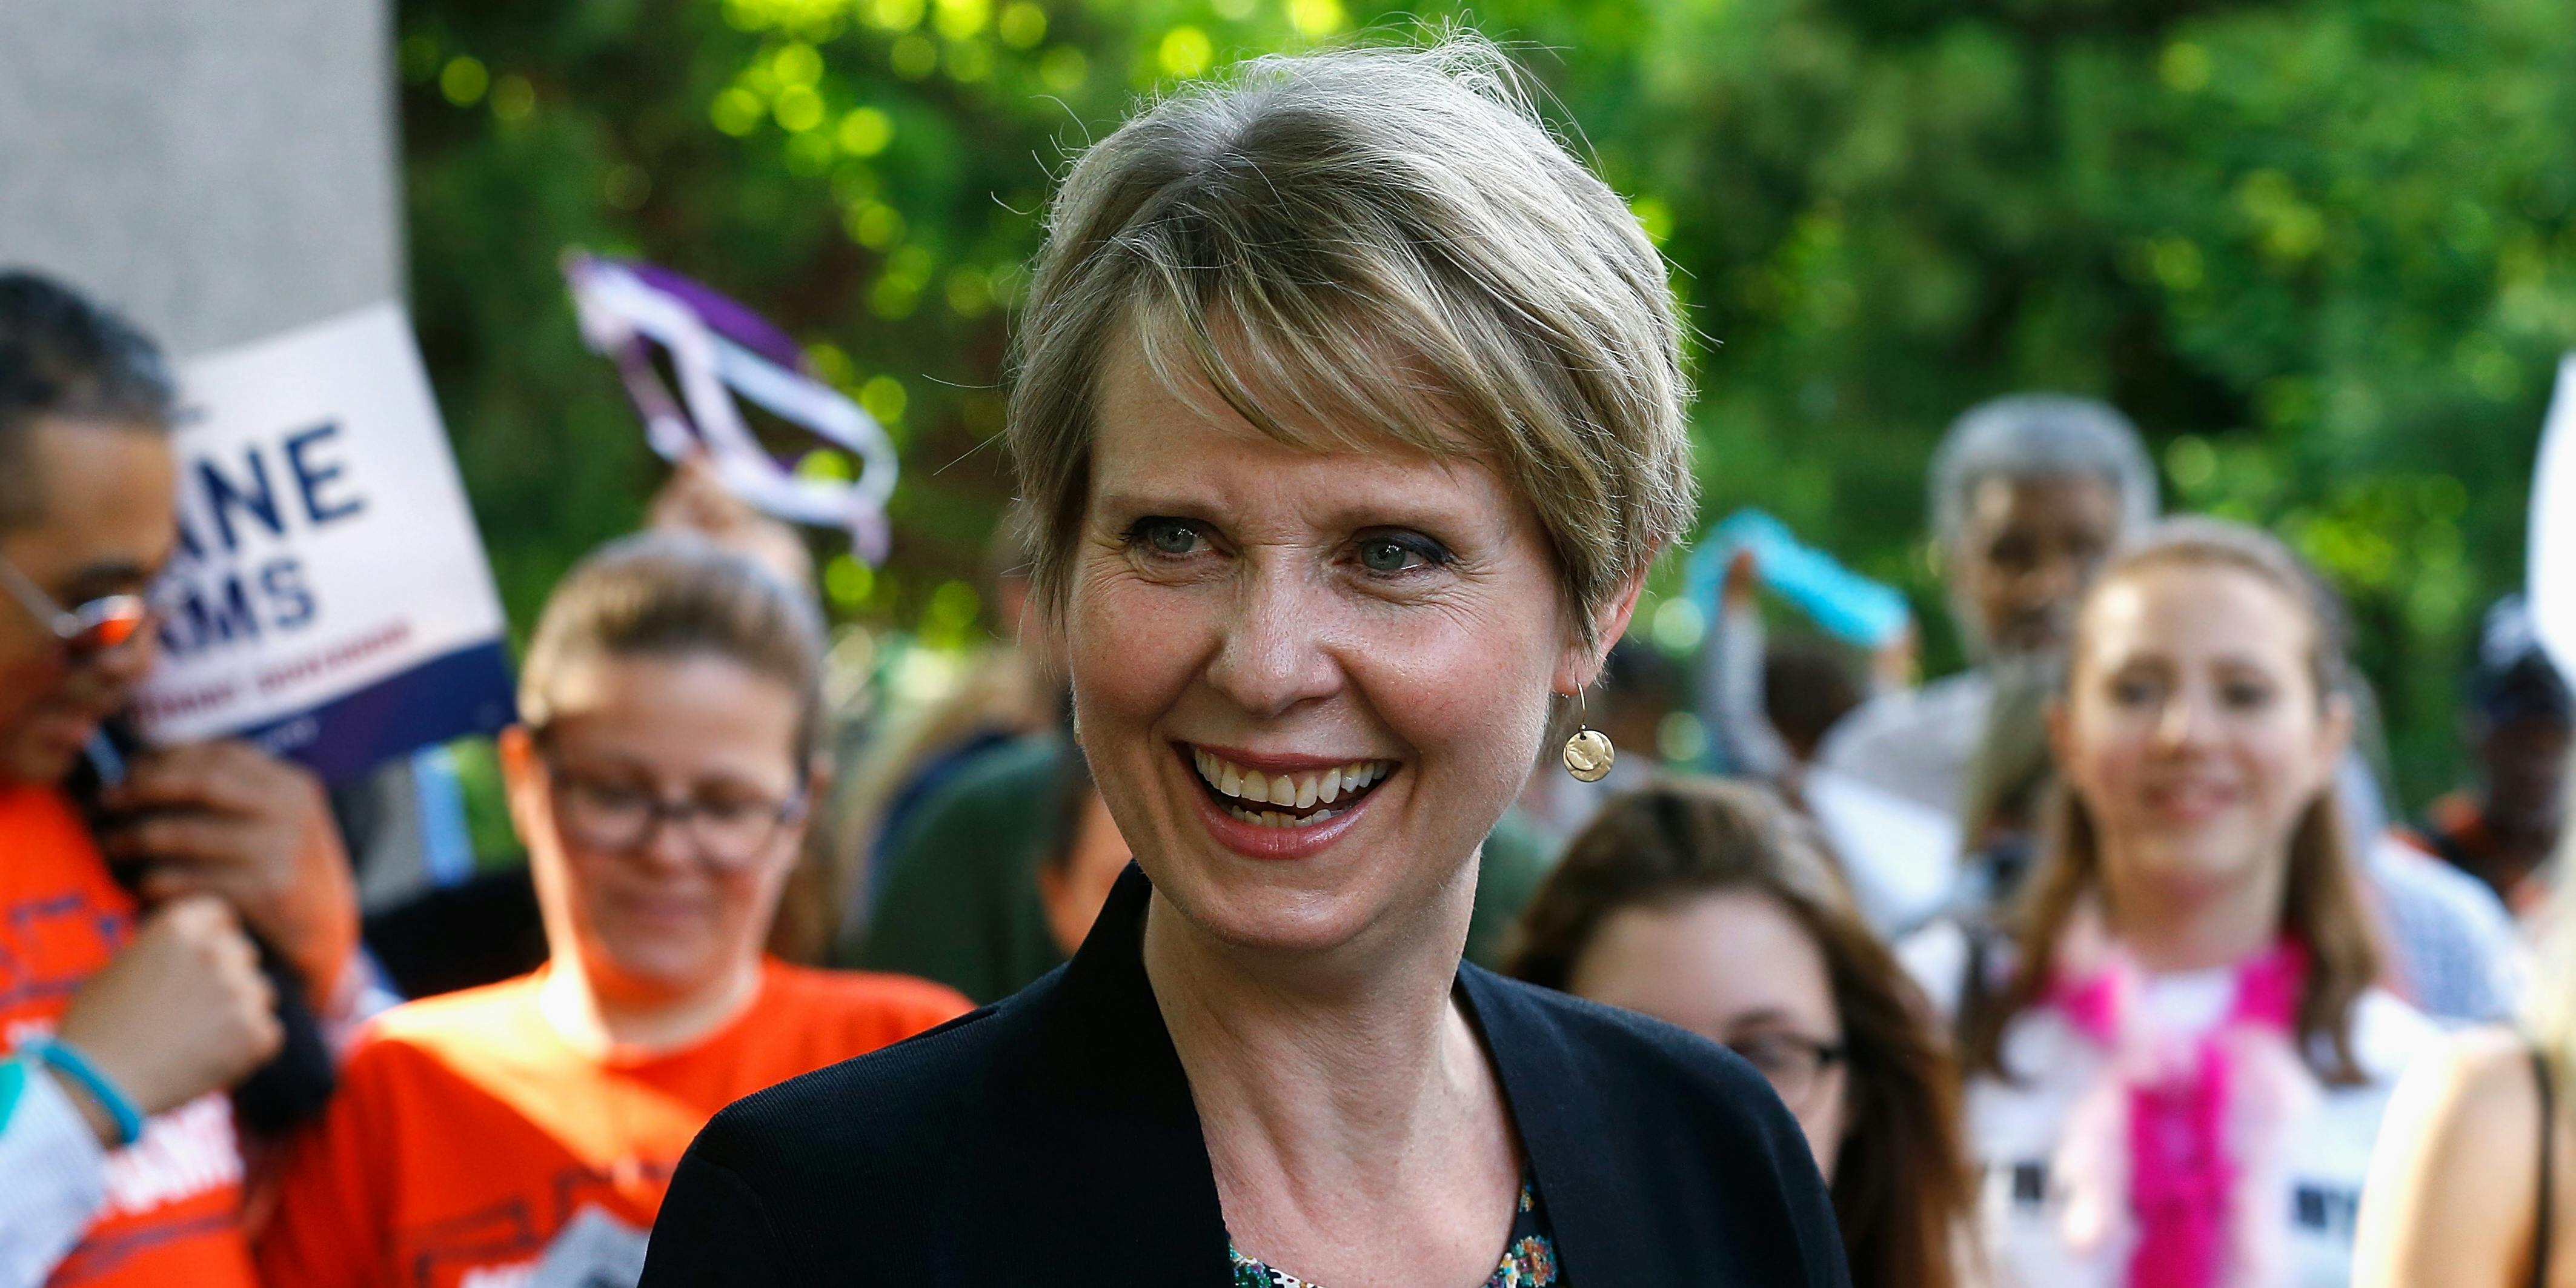 NEW YORK, NY - JUNE 05: Cynthia Nixon greets New Yorkers during the petitioning parade for New York State Governor at Union Square Park on June 5, 2018 in New York City. (Photo by John Lamparski/Getty Images)